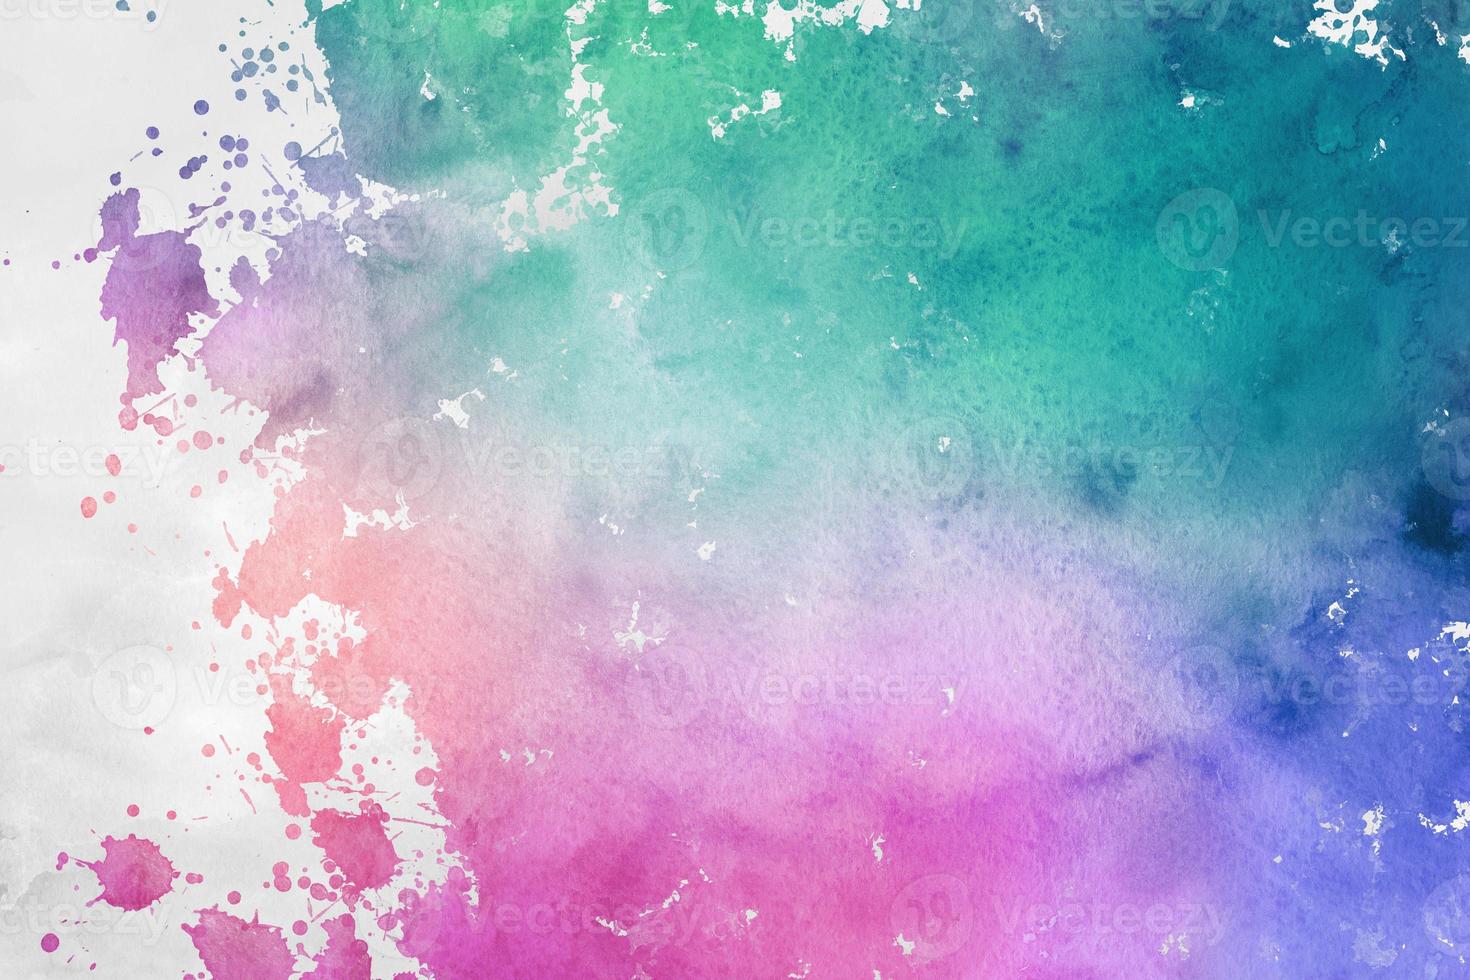 greenish blue and pink watercolor colorful bright ink and watercolor textures brushed painted abstract background. brush stroked photo